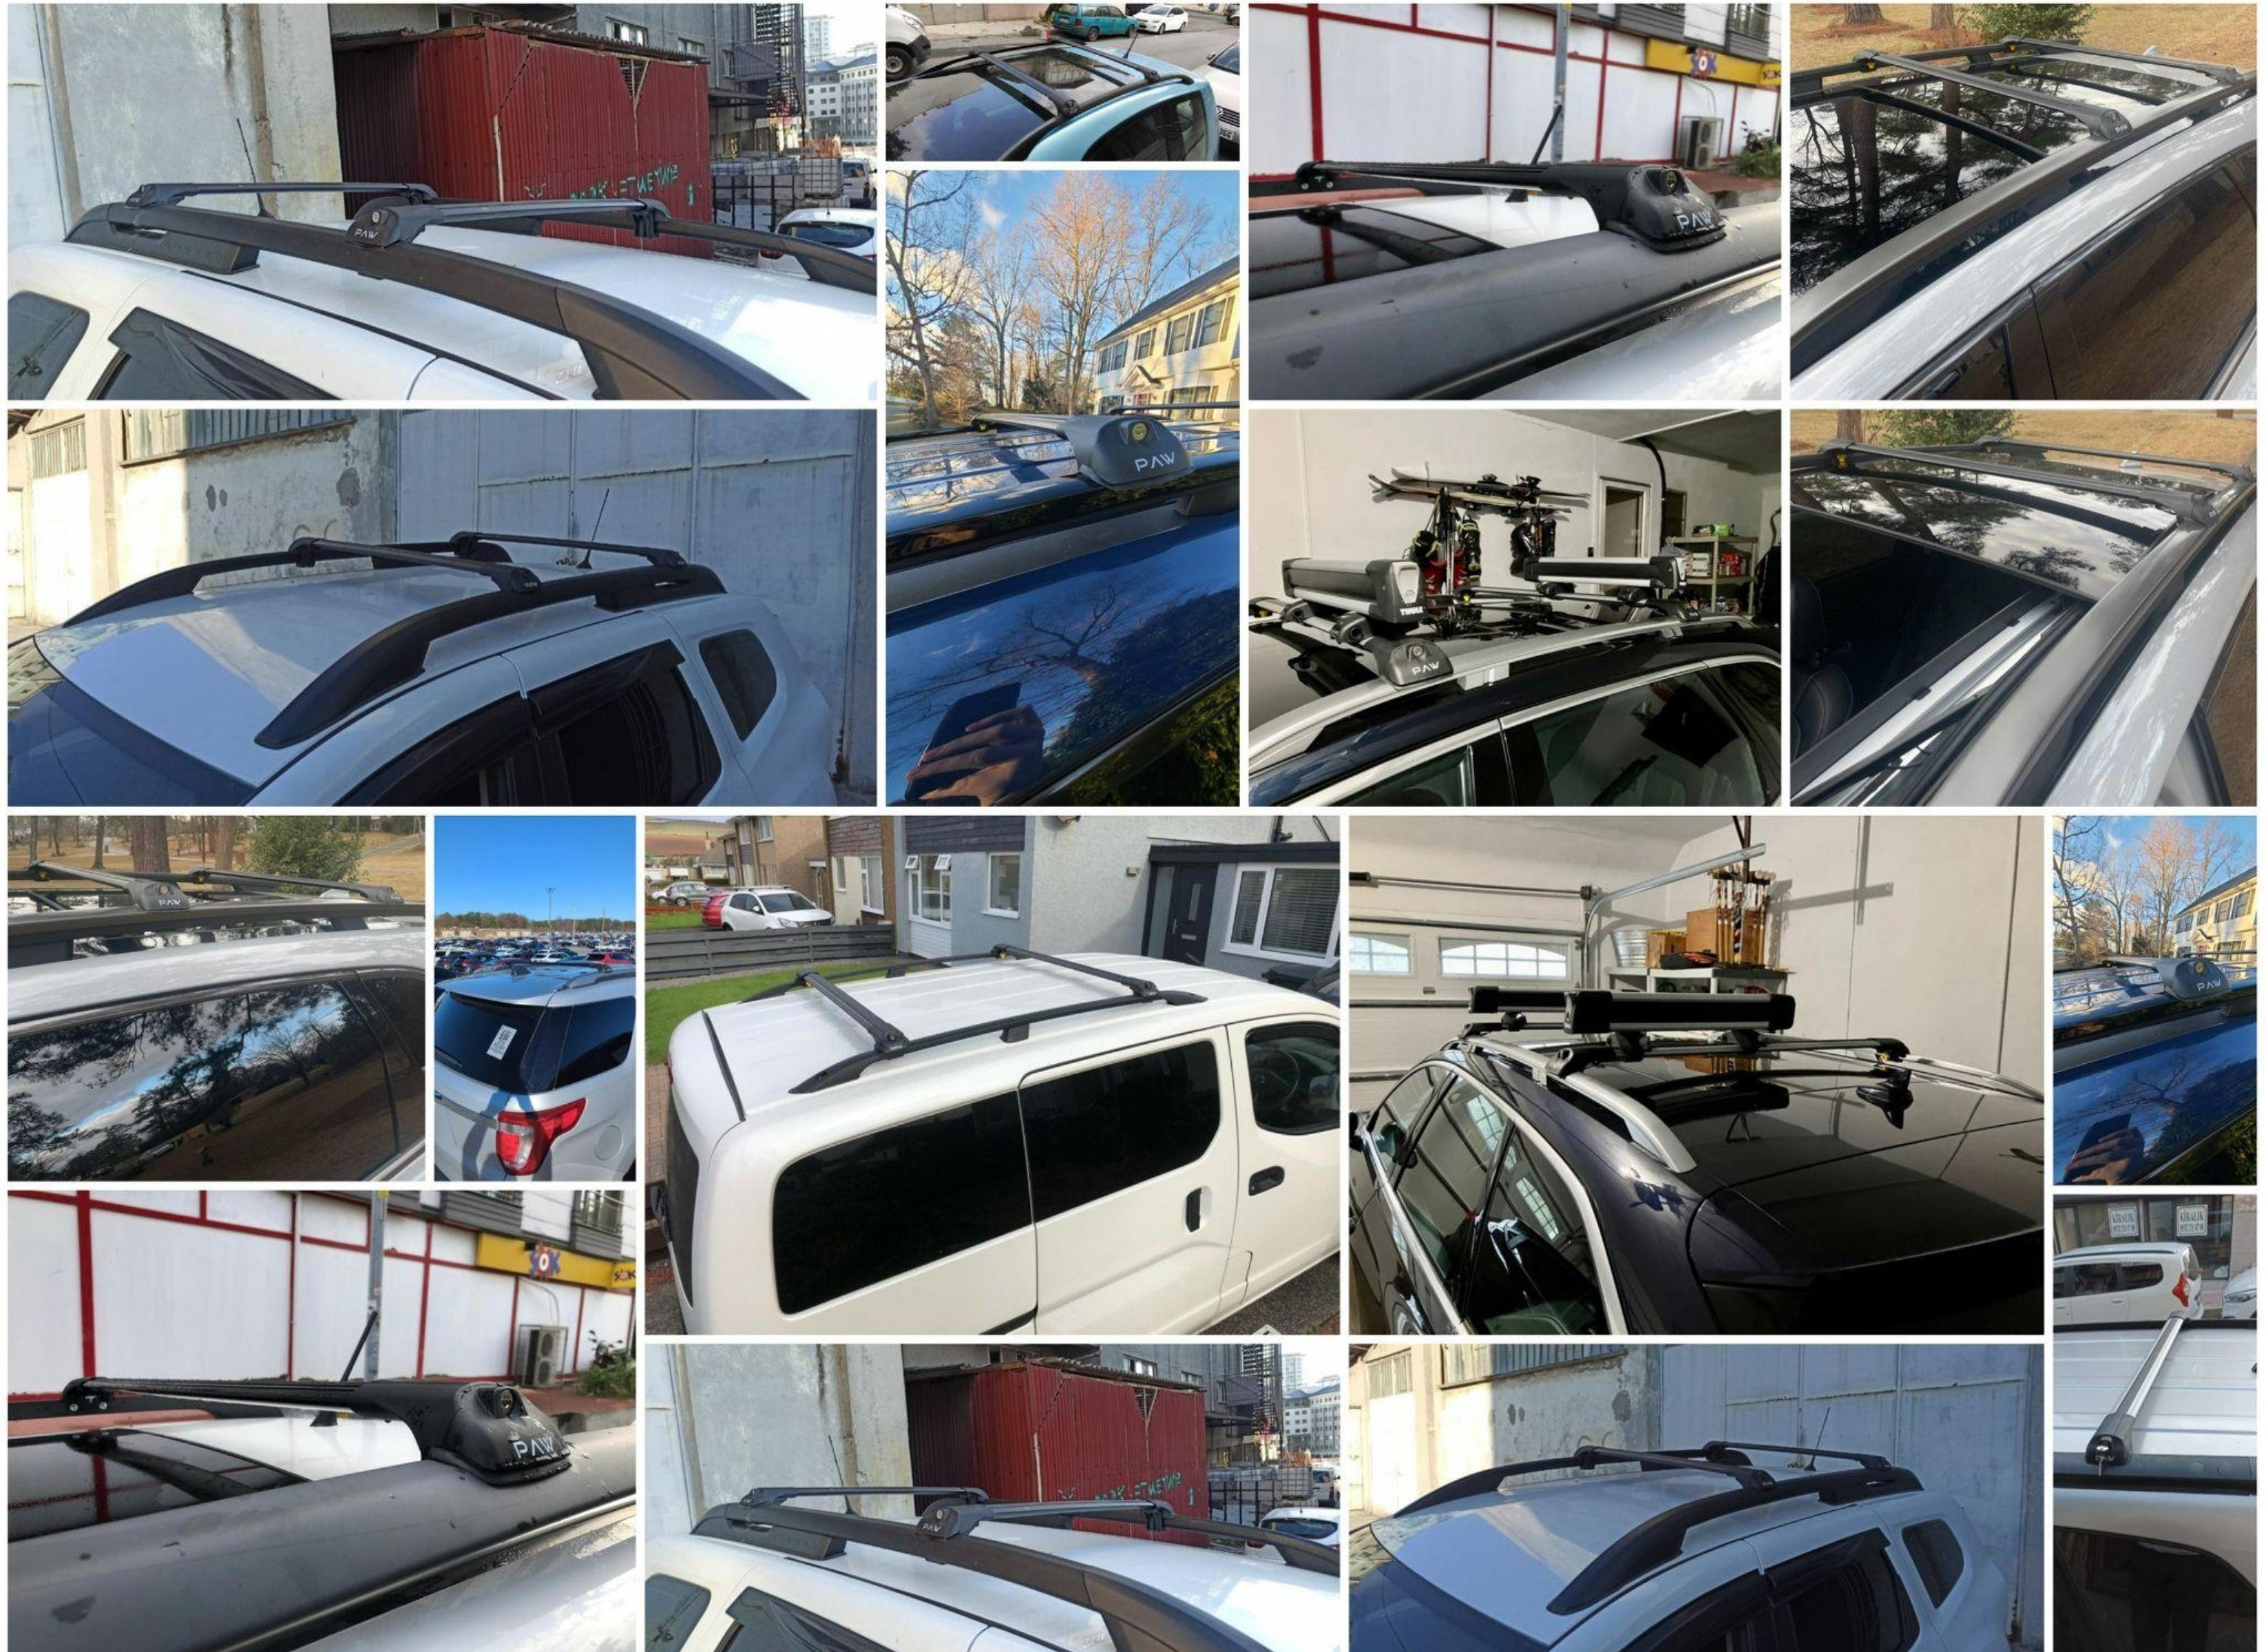 For Land Rover Discovery  Sport 2015-Up Roof Rack Cross Bars Metal Bracket Raised Rail Alu Silver